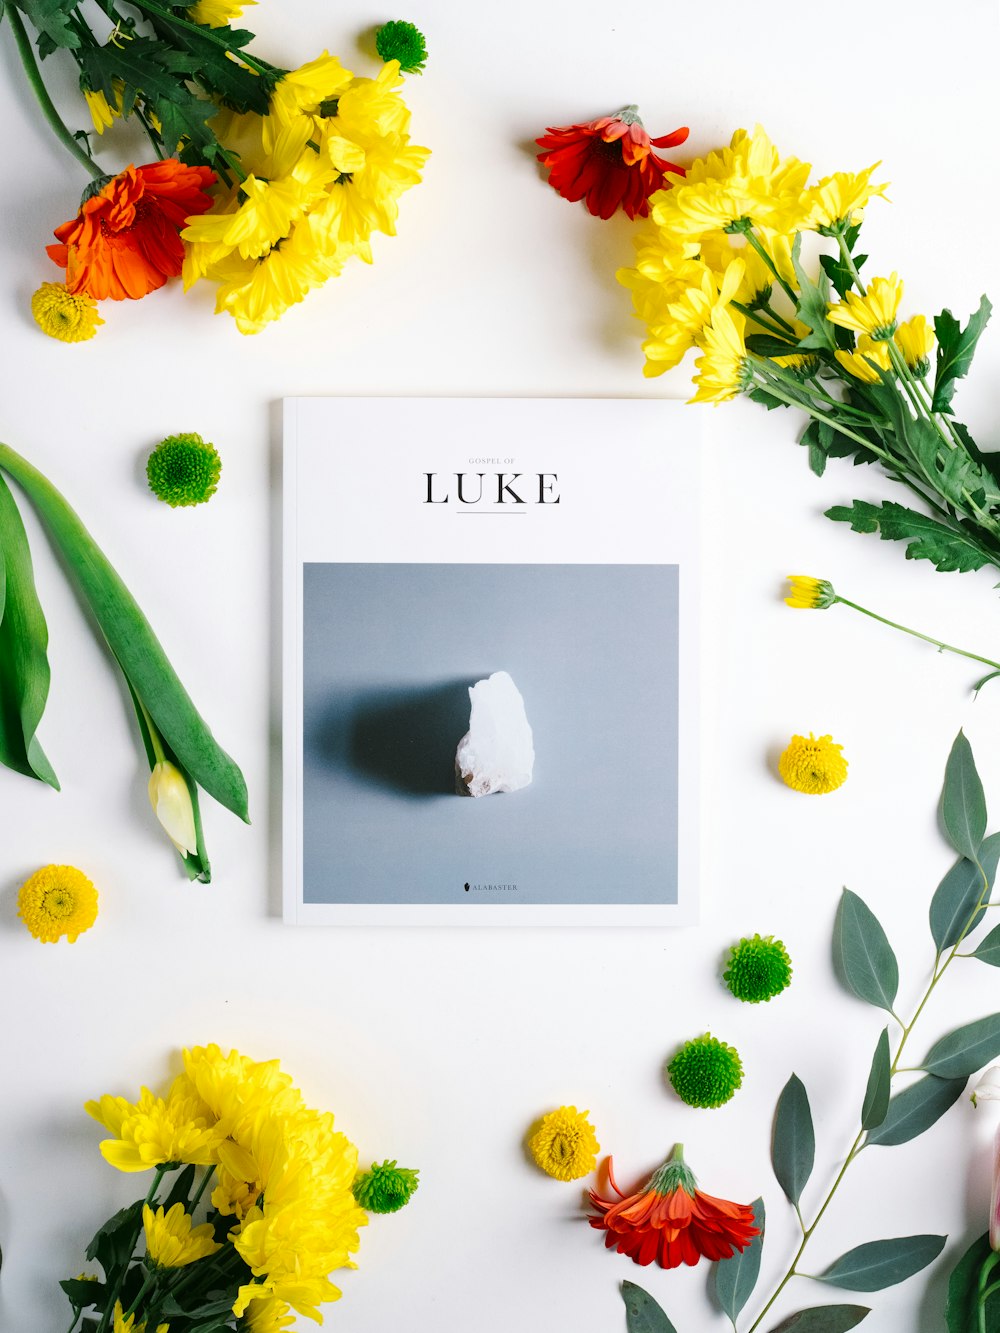 Luke book, white stone, and yellow and red flowers